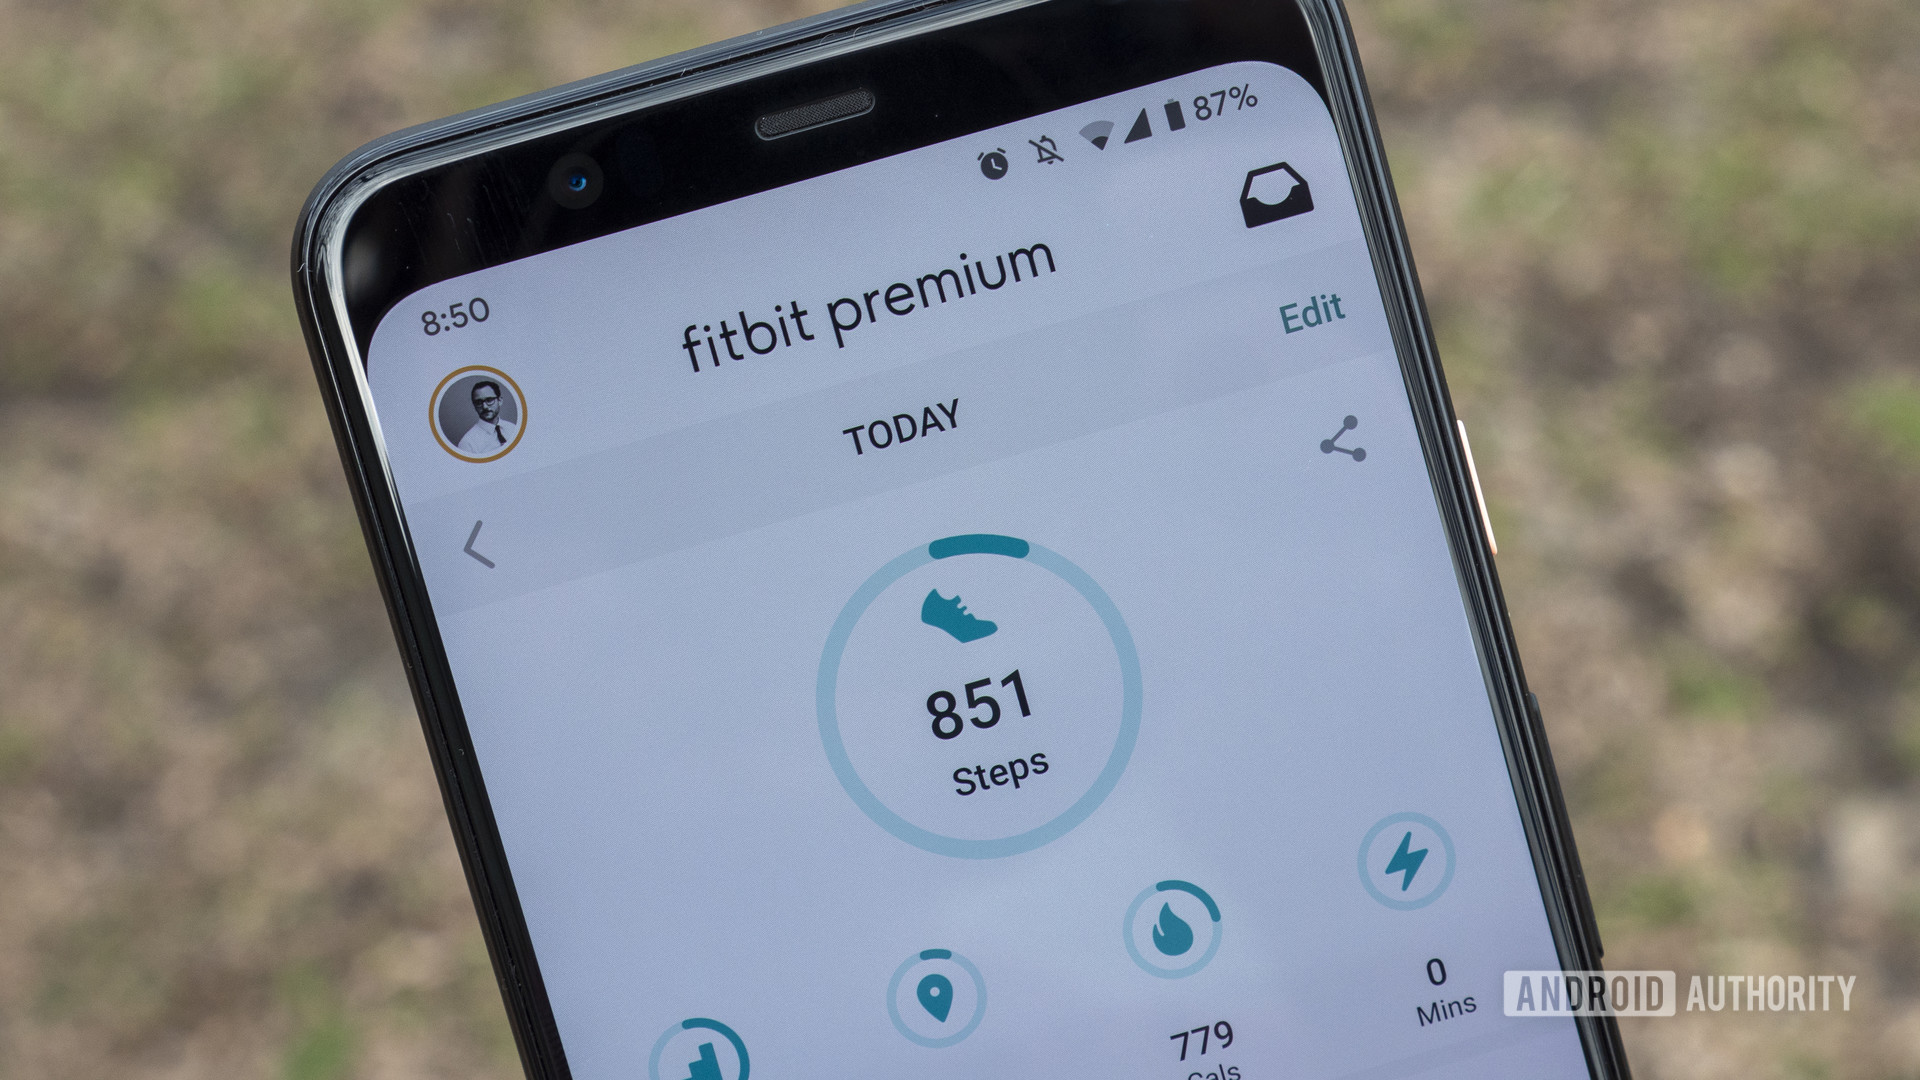 fitbit premium review fitbit today screen 3